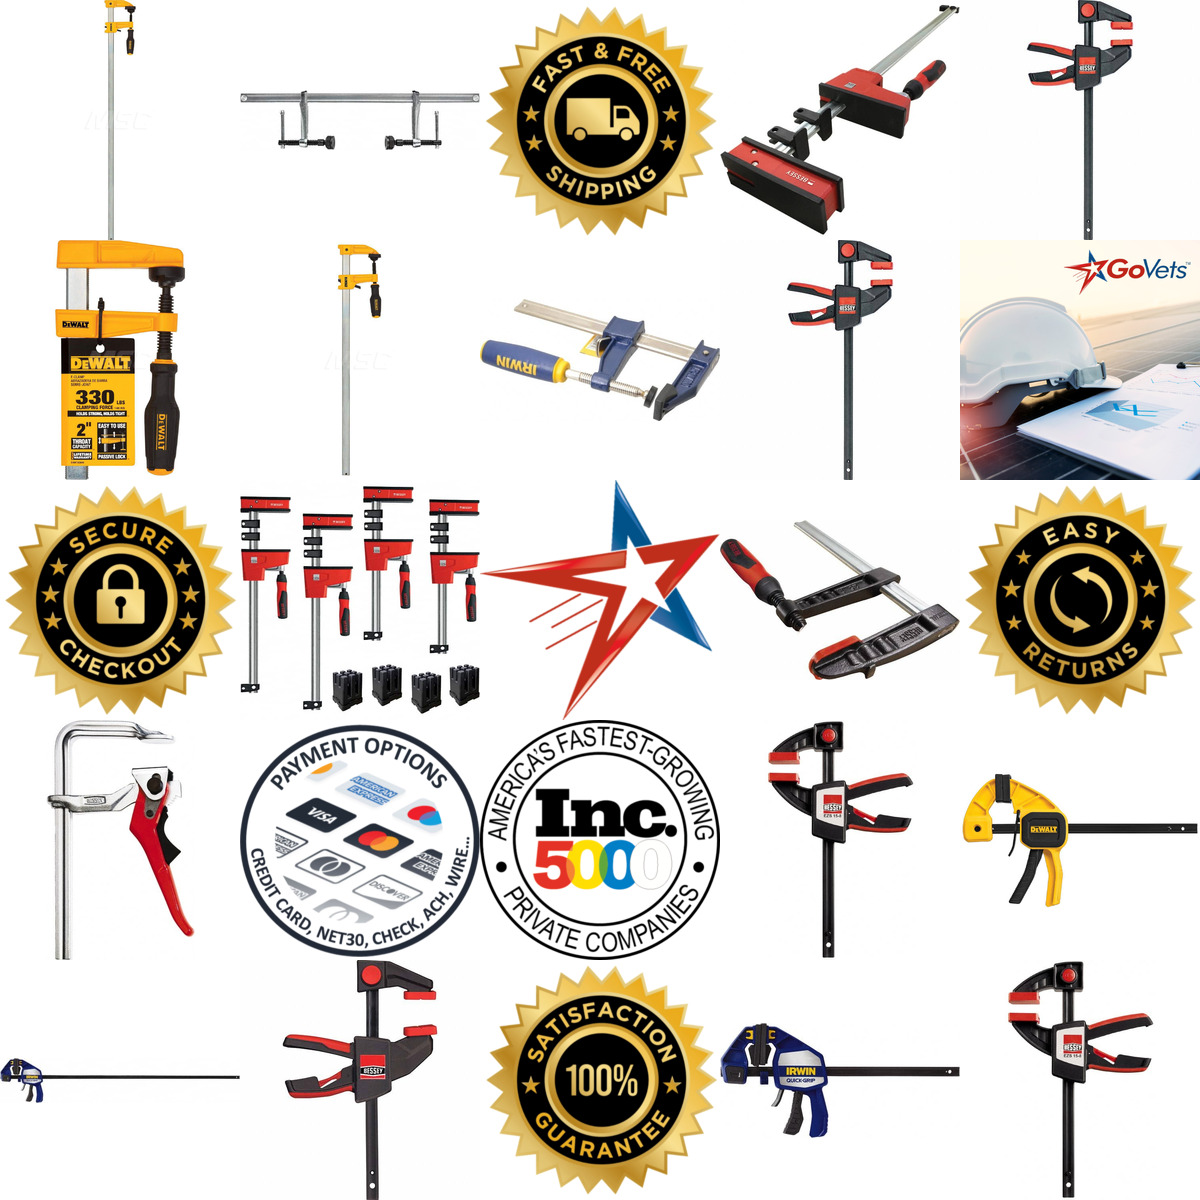 A selection of Bar Clamps products on GoVets